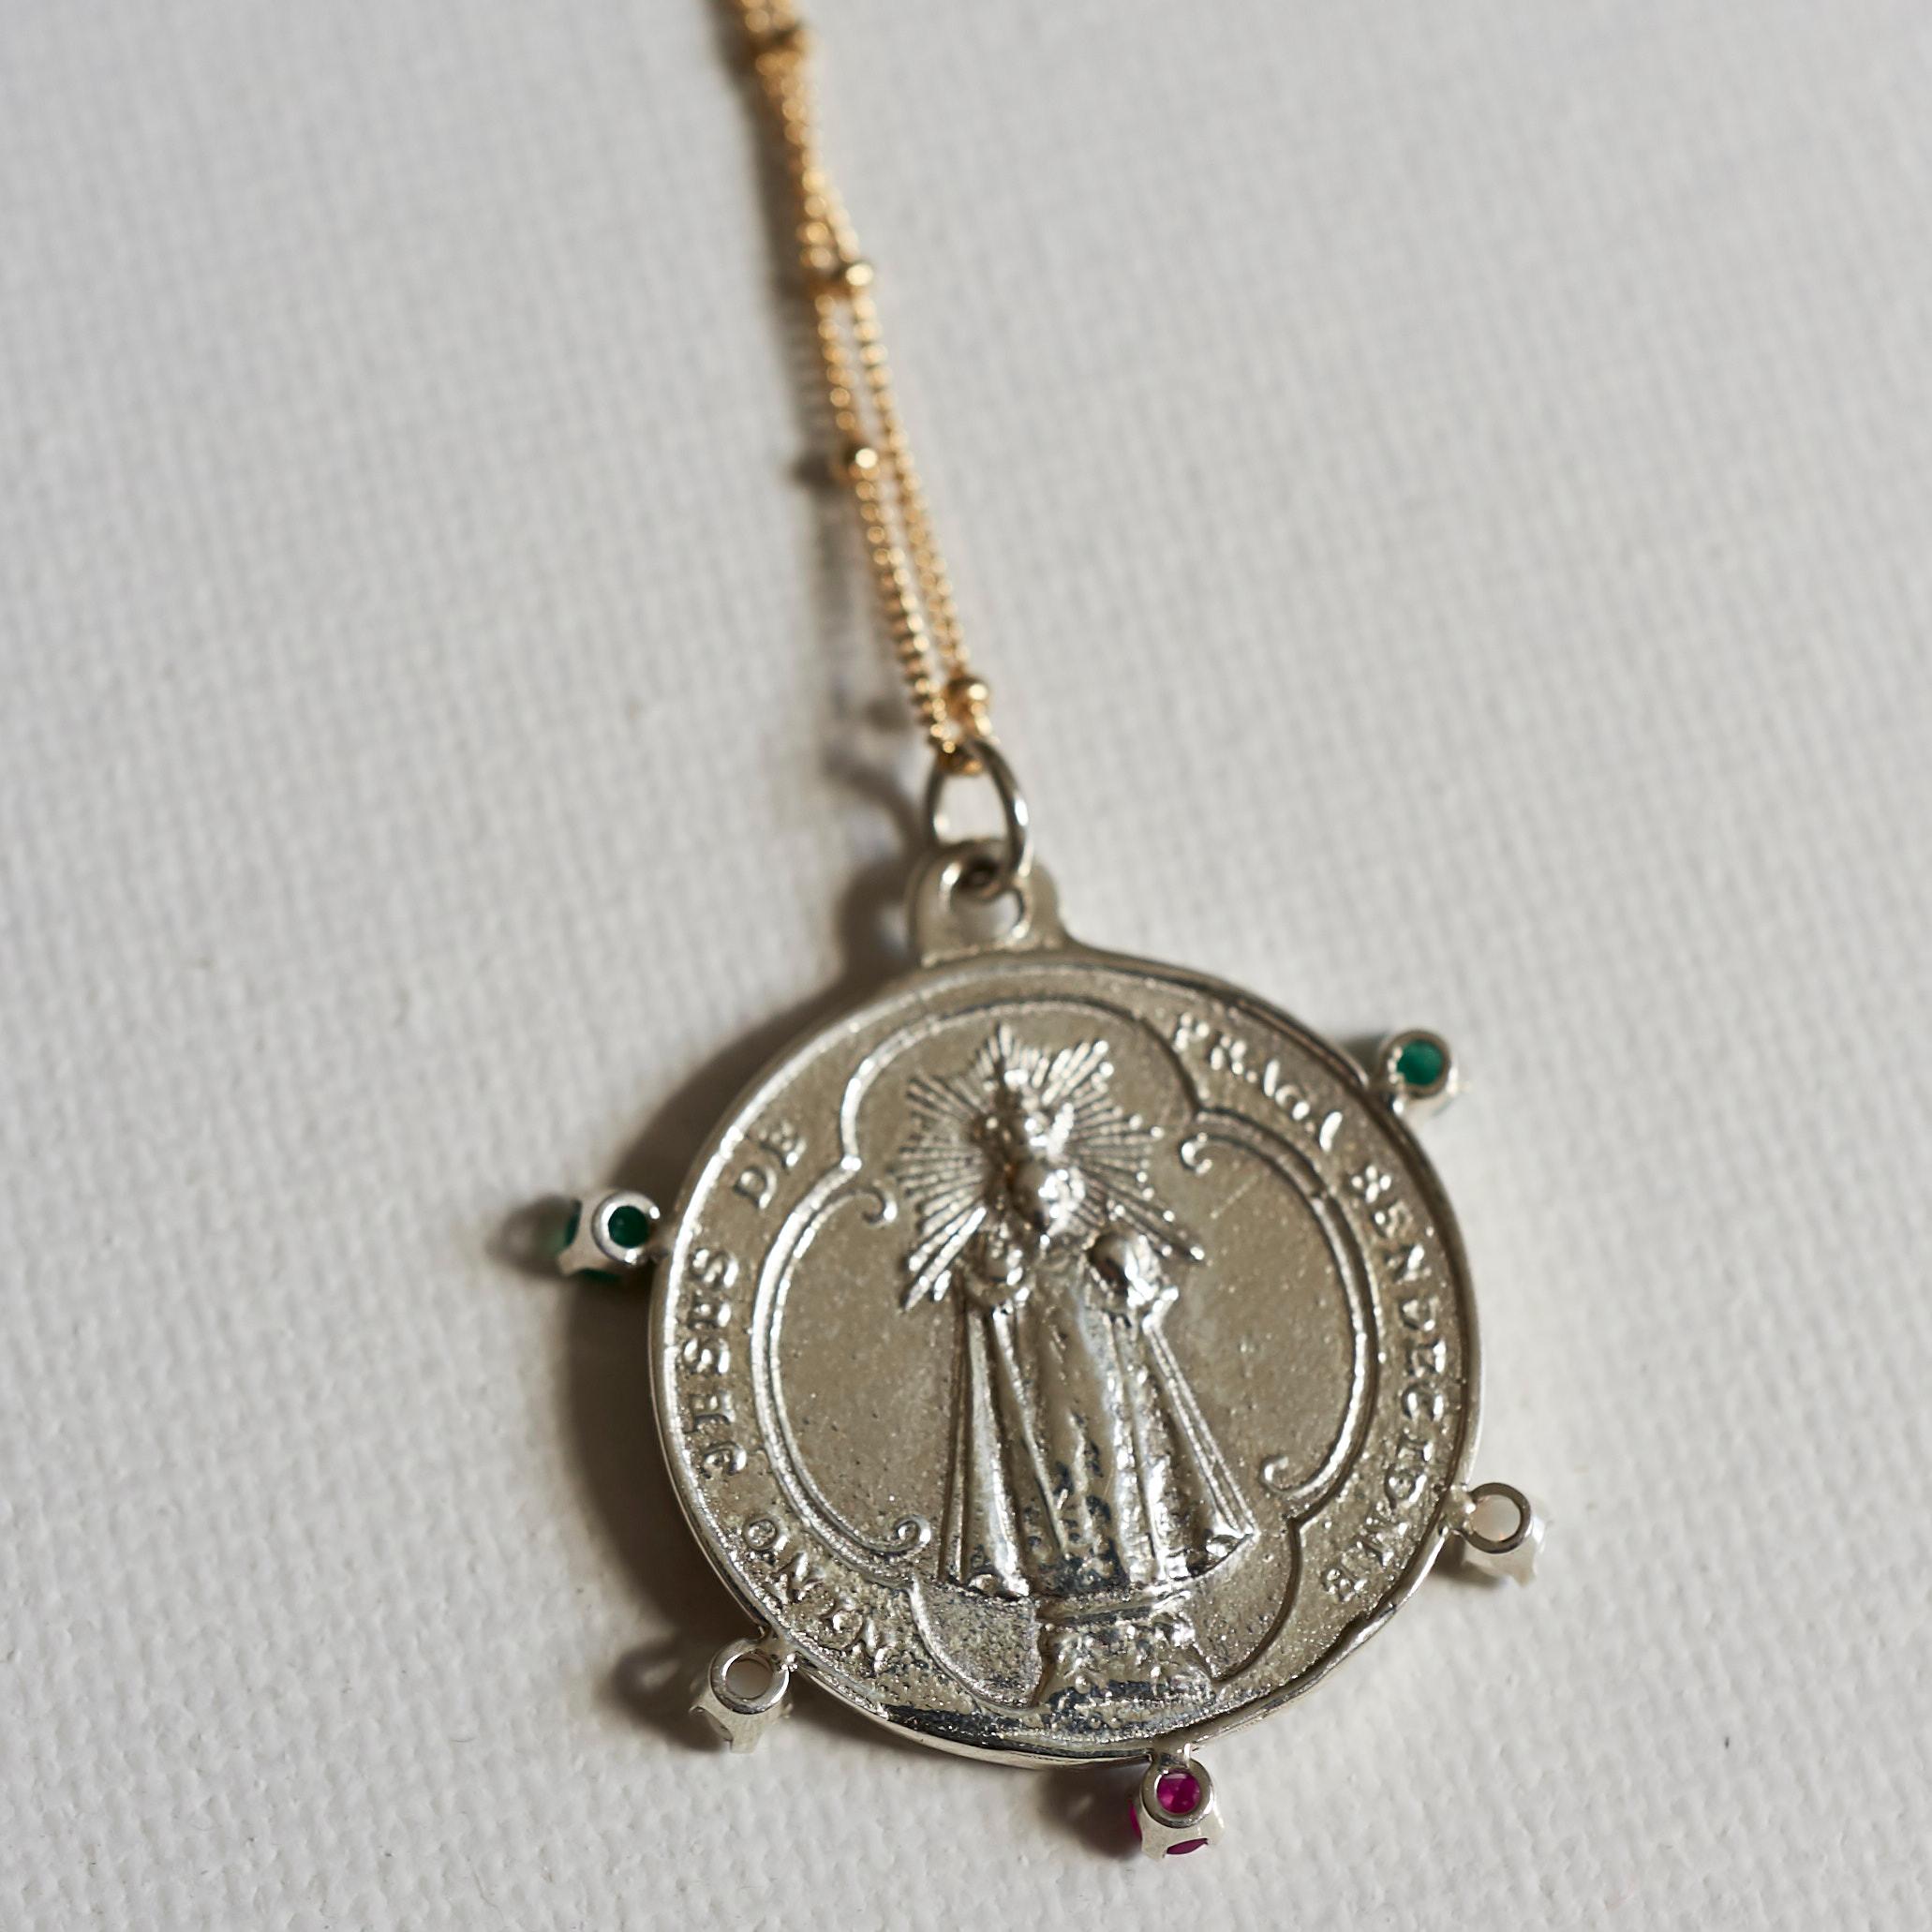 Emerald Ruby Opal Virgin Mary Medal Necklace Silver Pendant Gold Filled Chain J For Sale 1